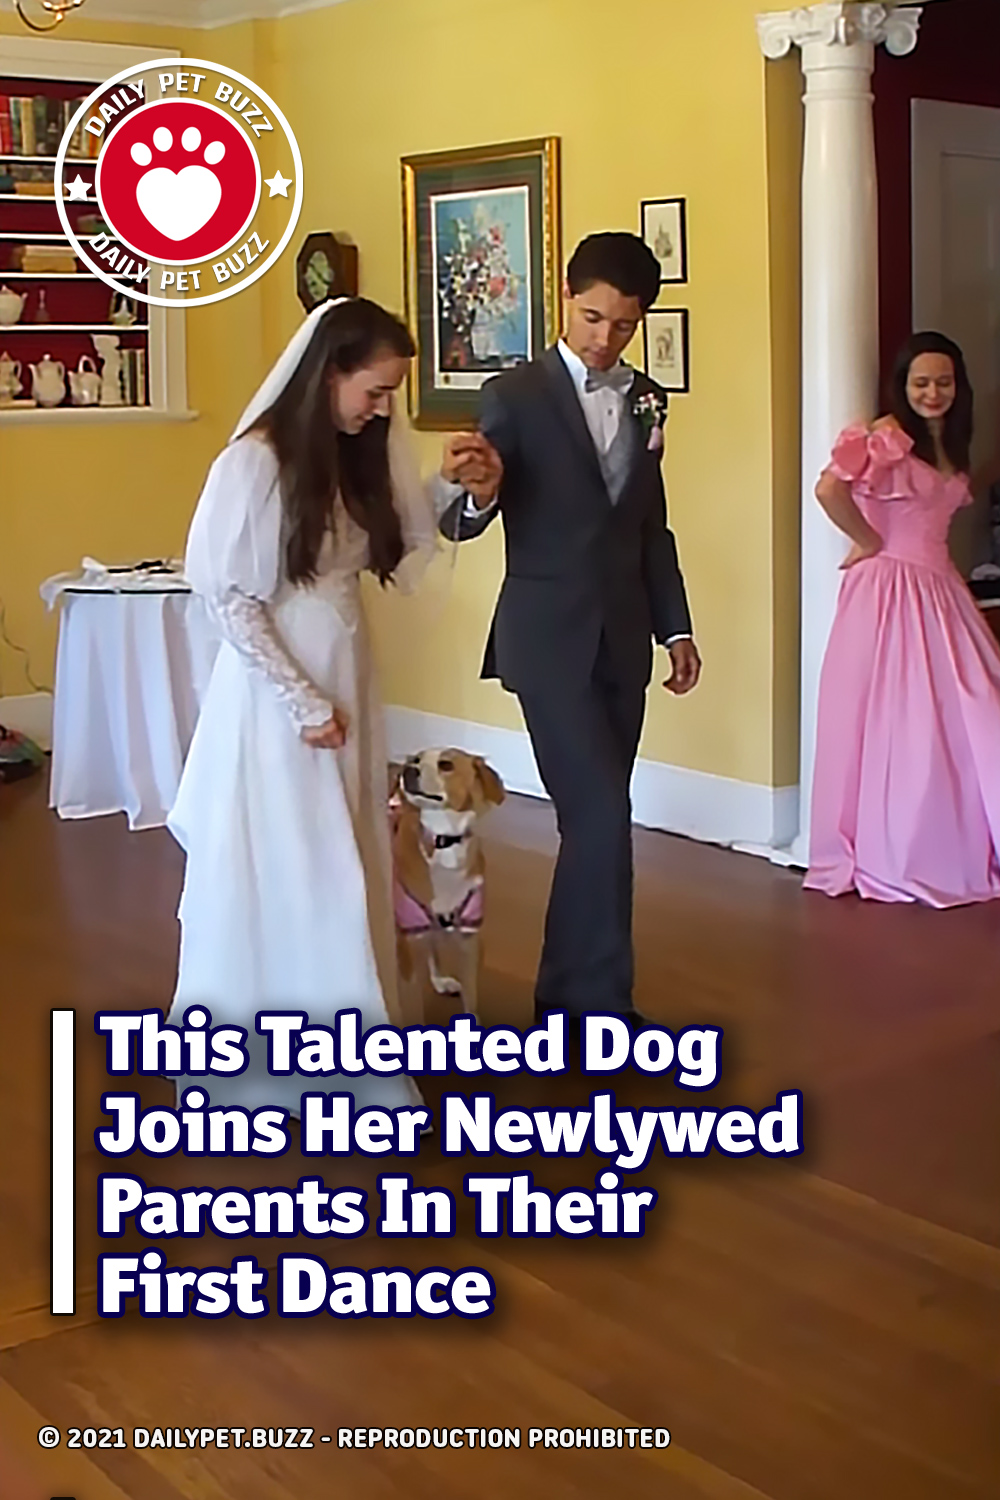 This Talented Dog Joins Her Newlywed Parents In Their First Dance